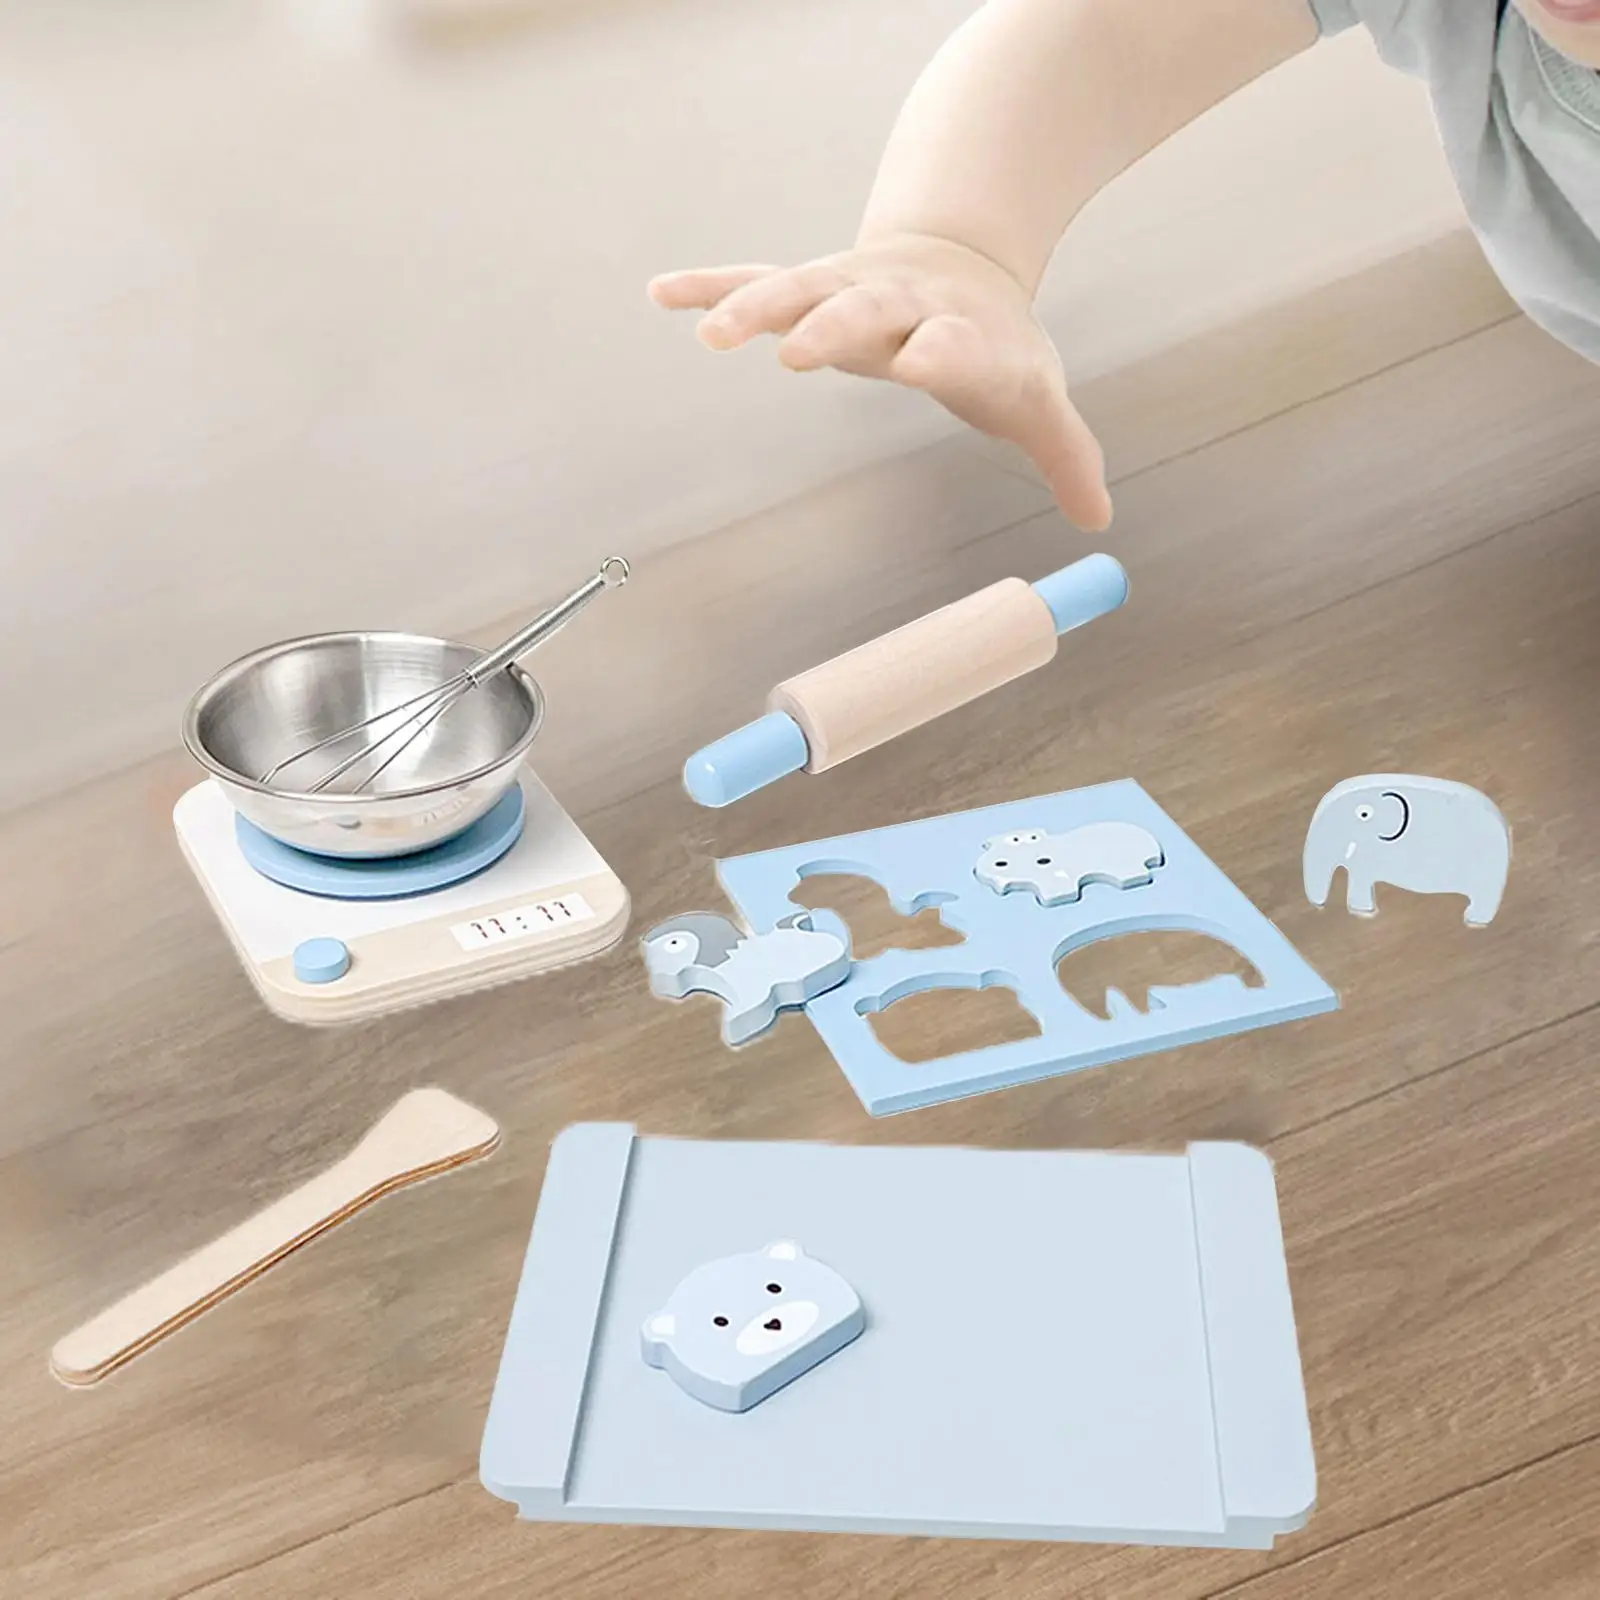 Simulation Food Pretend Play Baking Machine Toy Hands-On Ability Accessories Educational Role Play Biscuit Making for Toddlers